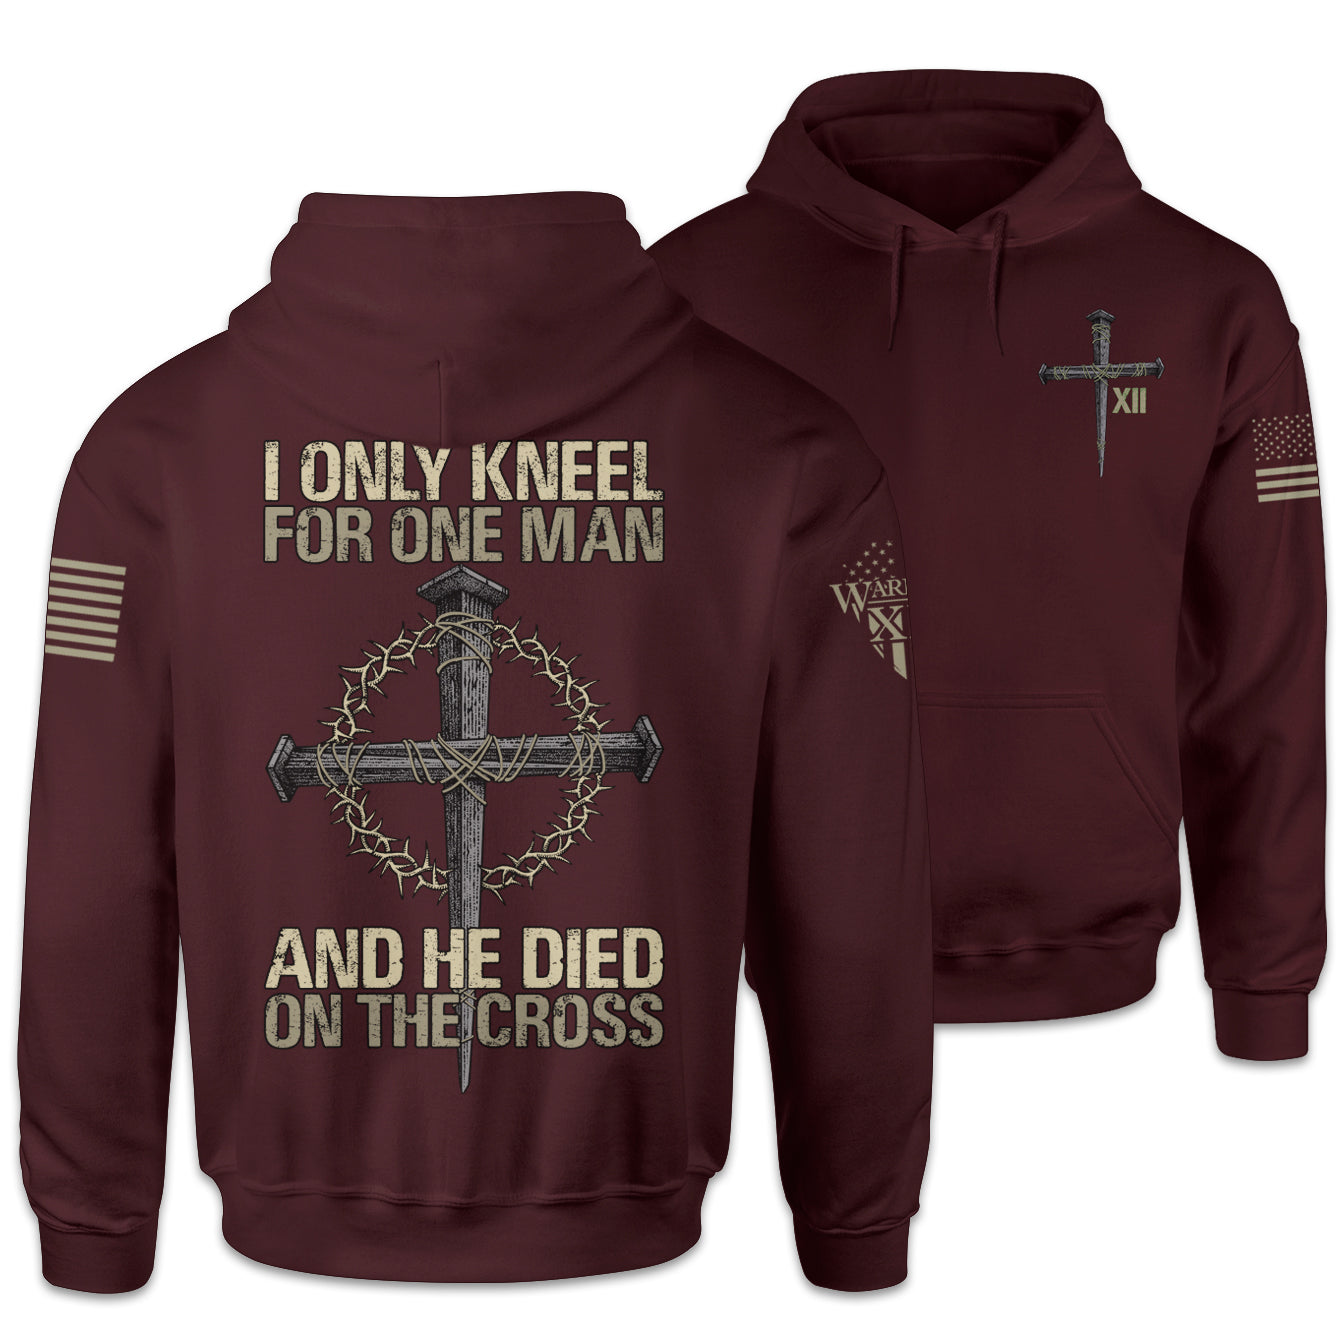 Front & back burgundy hoodie with the words "I only kneel for one man, and he died on the cross" with a cross printed on the shirt.